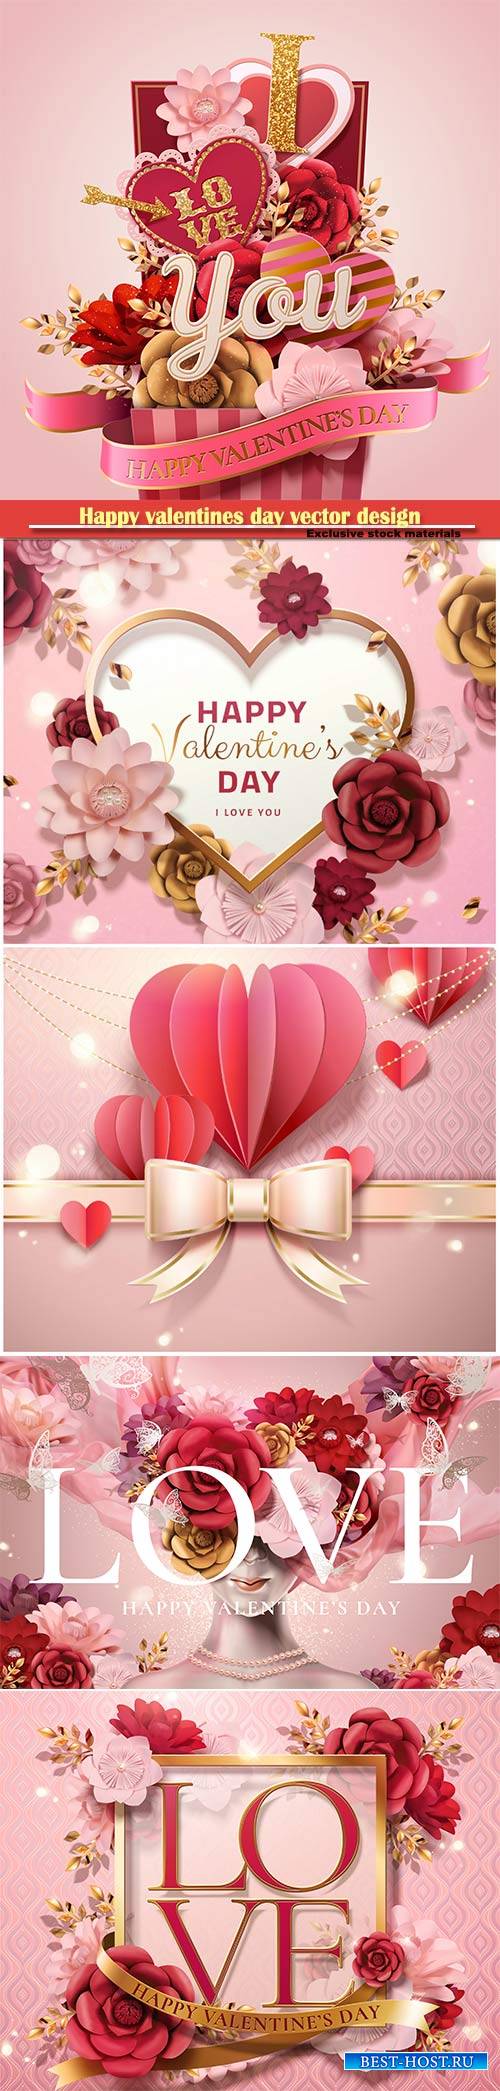 Happy valentines day vector design with heart, balloons, roses in 3d illust ...